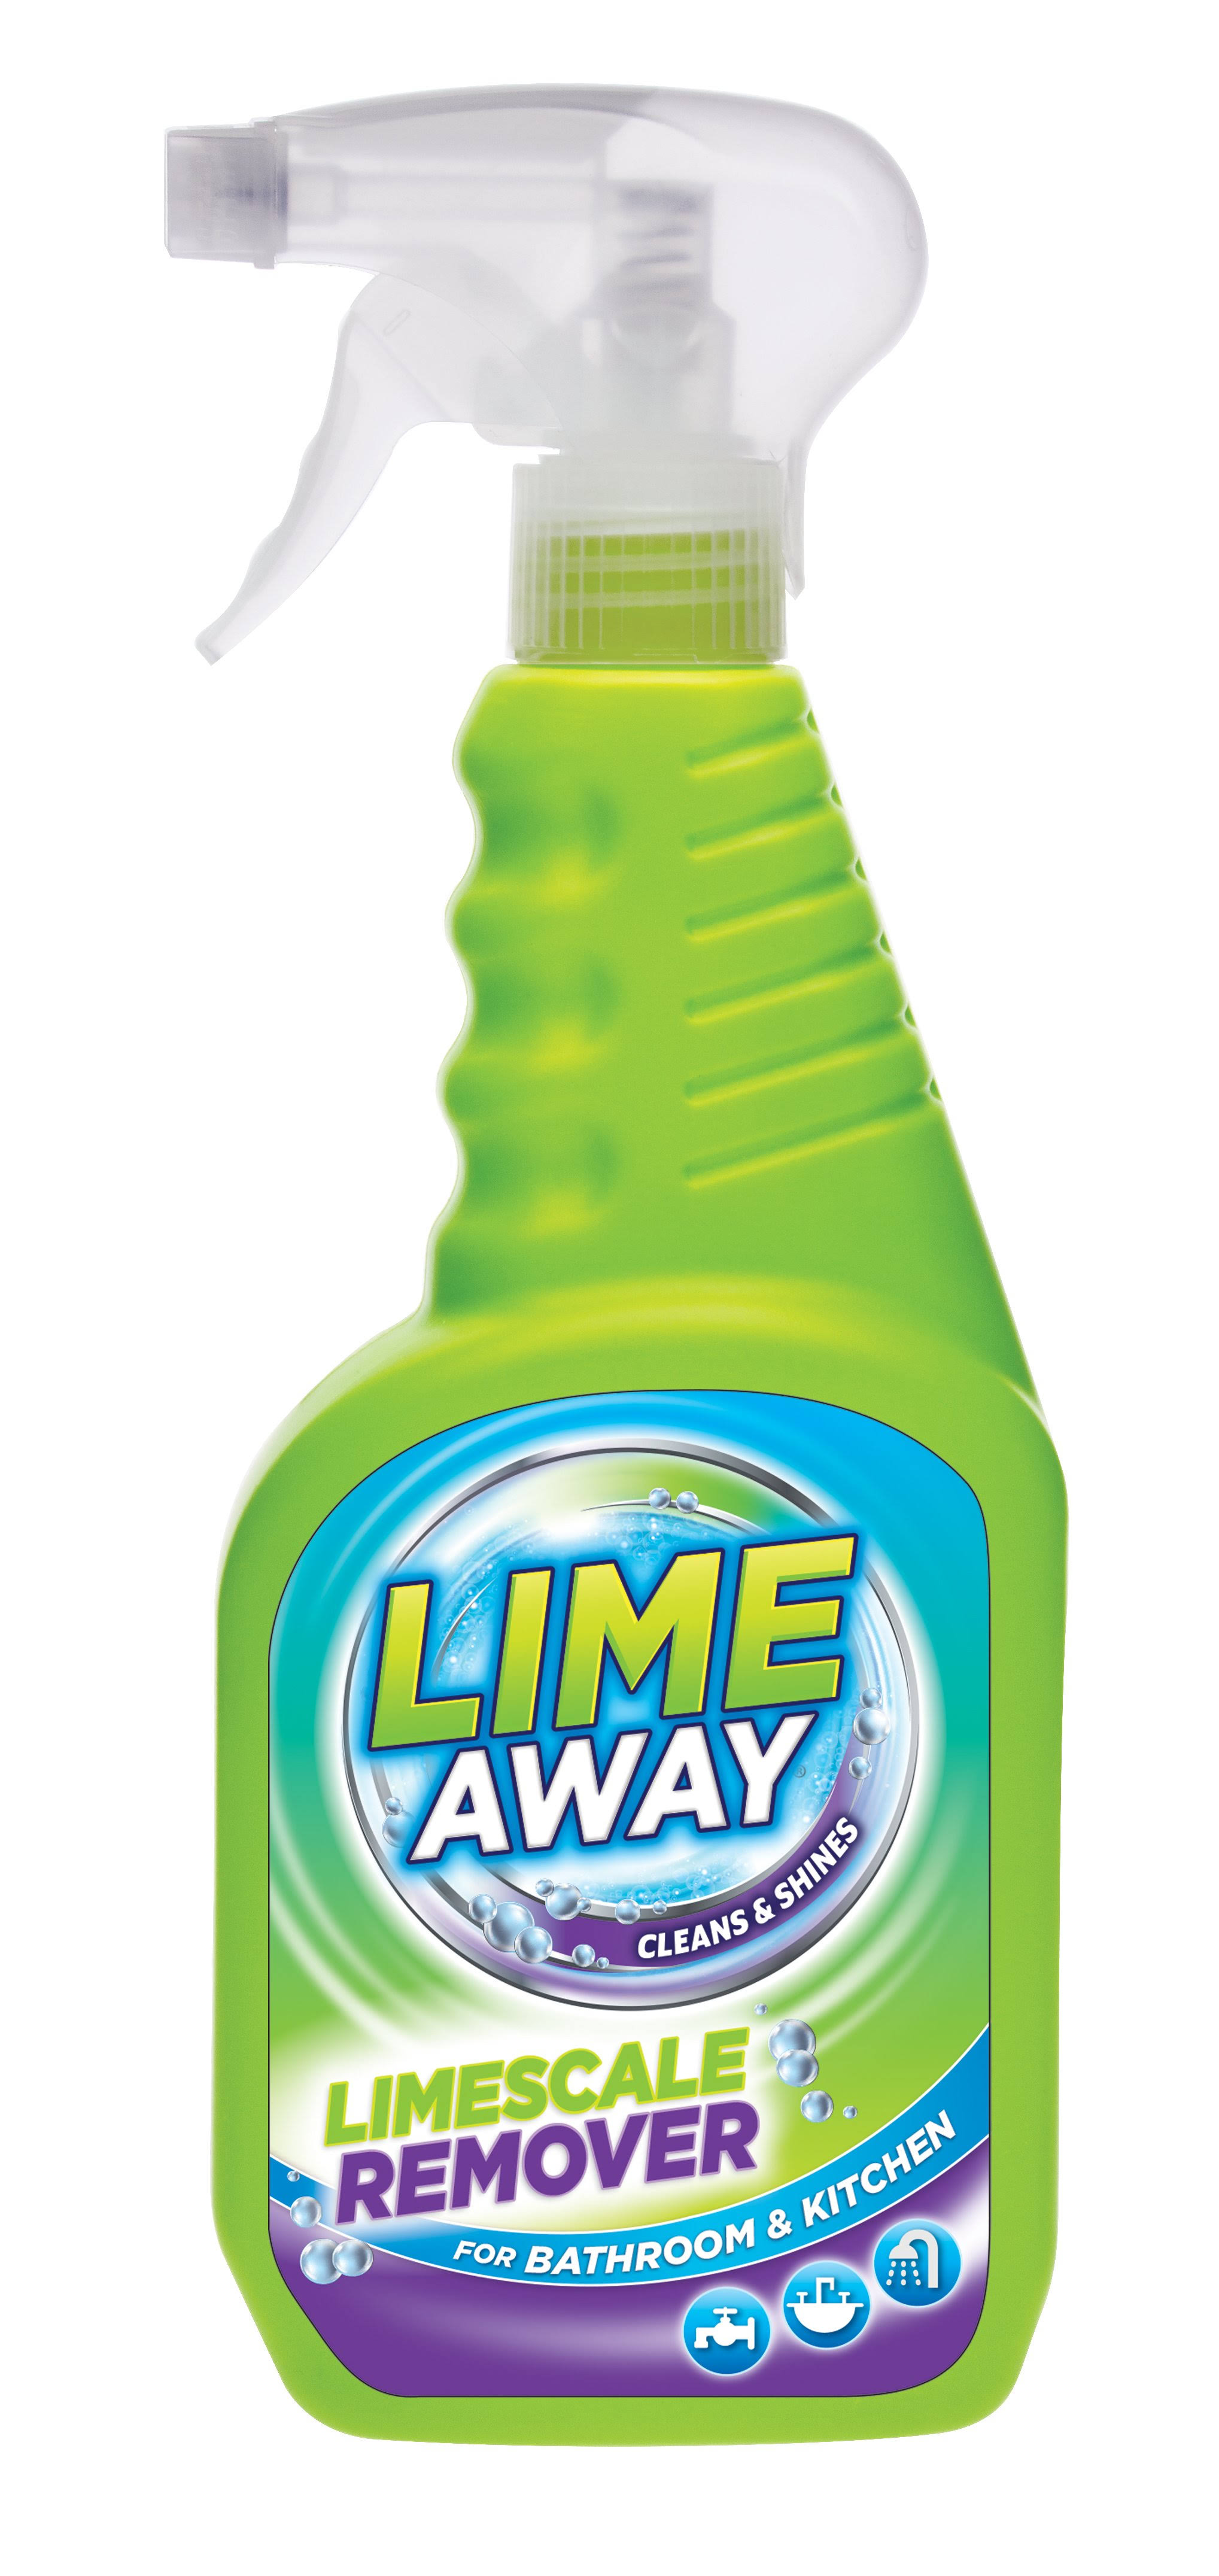 Lime Away Limescale Remover 500ml